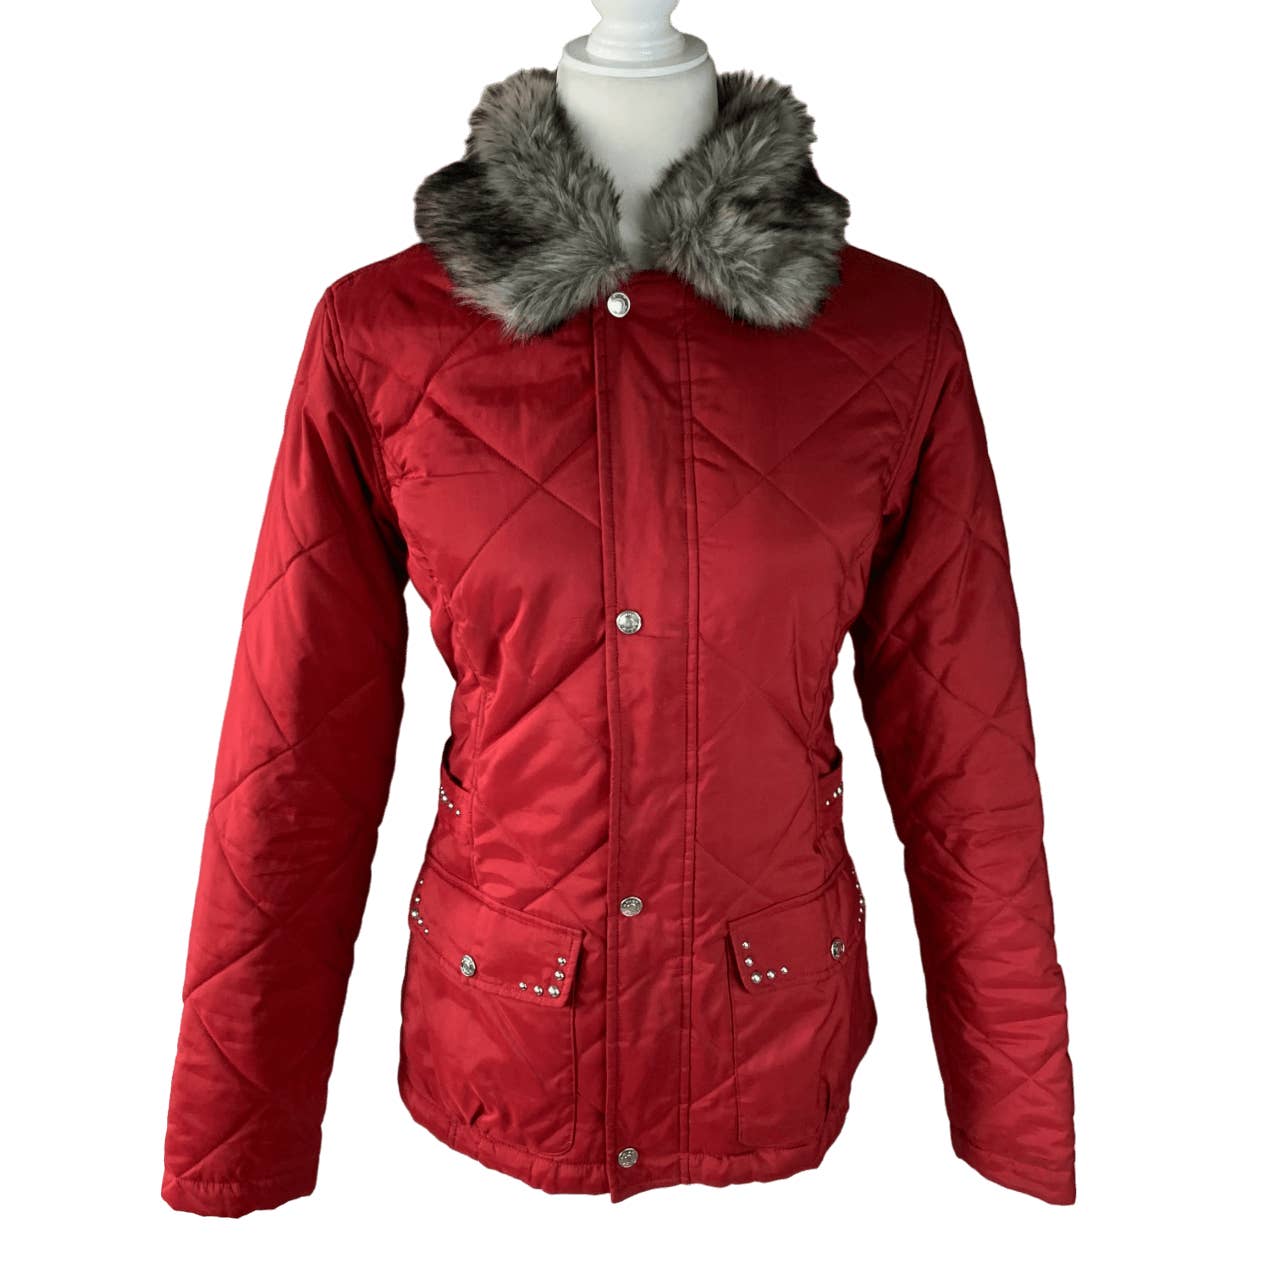 Ariat Quilted Puffer Jacket in Red - Woman's Medium